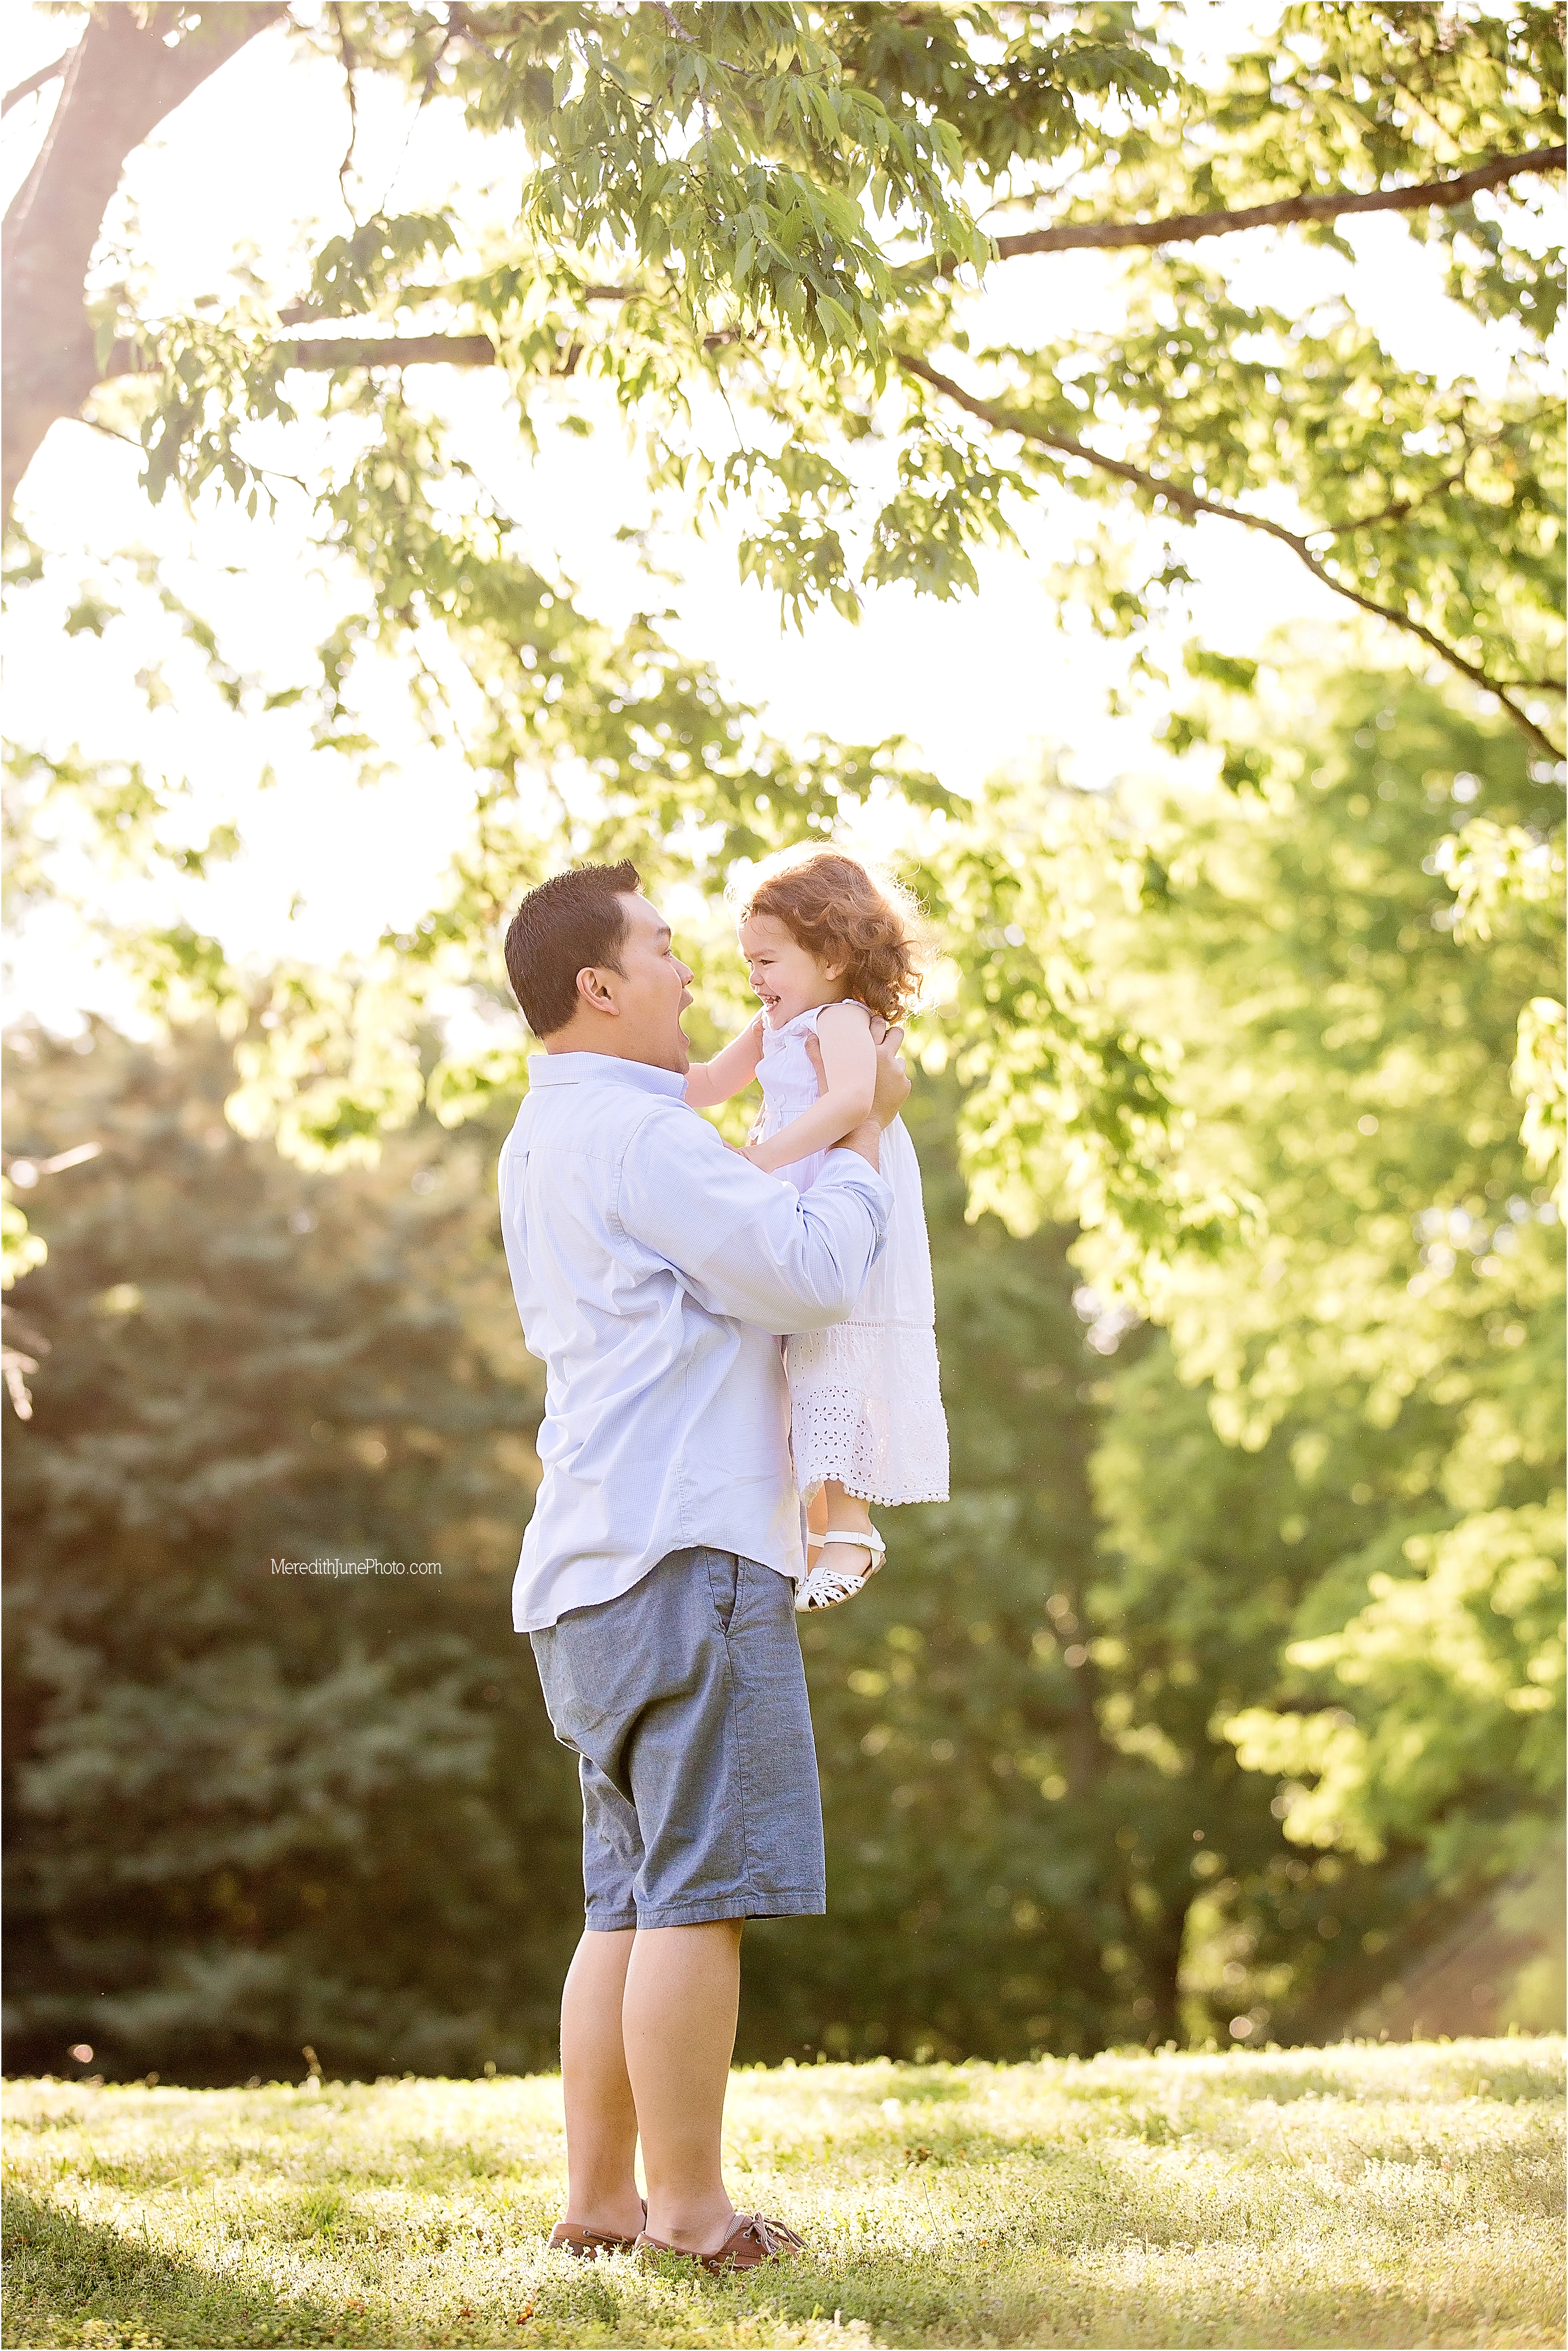 outdoor family photo session in South Carolina at Anne Springs Greenway